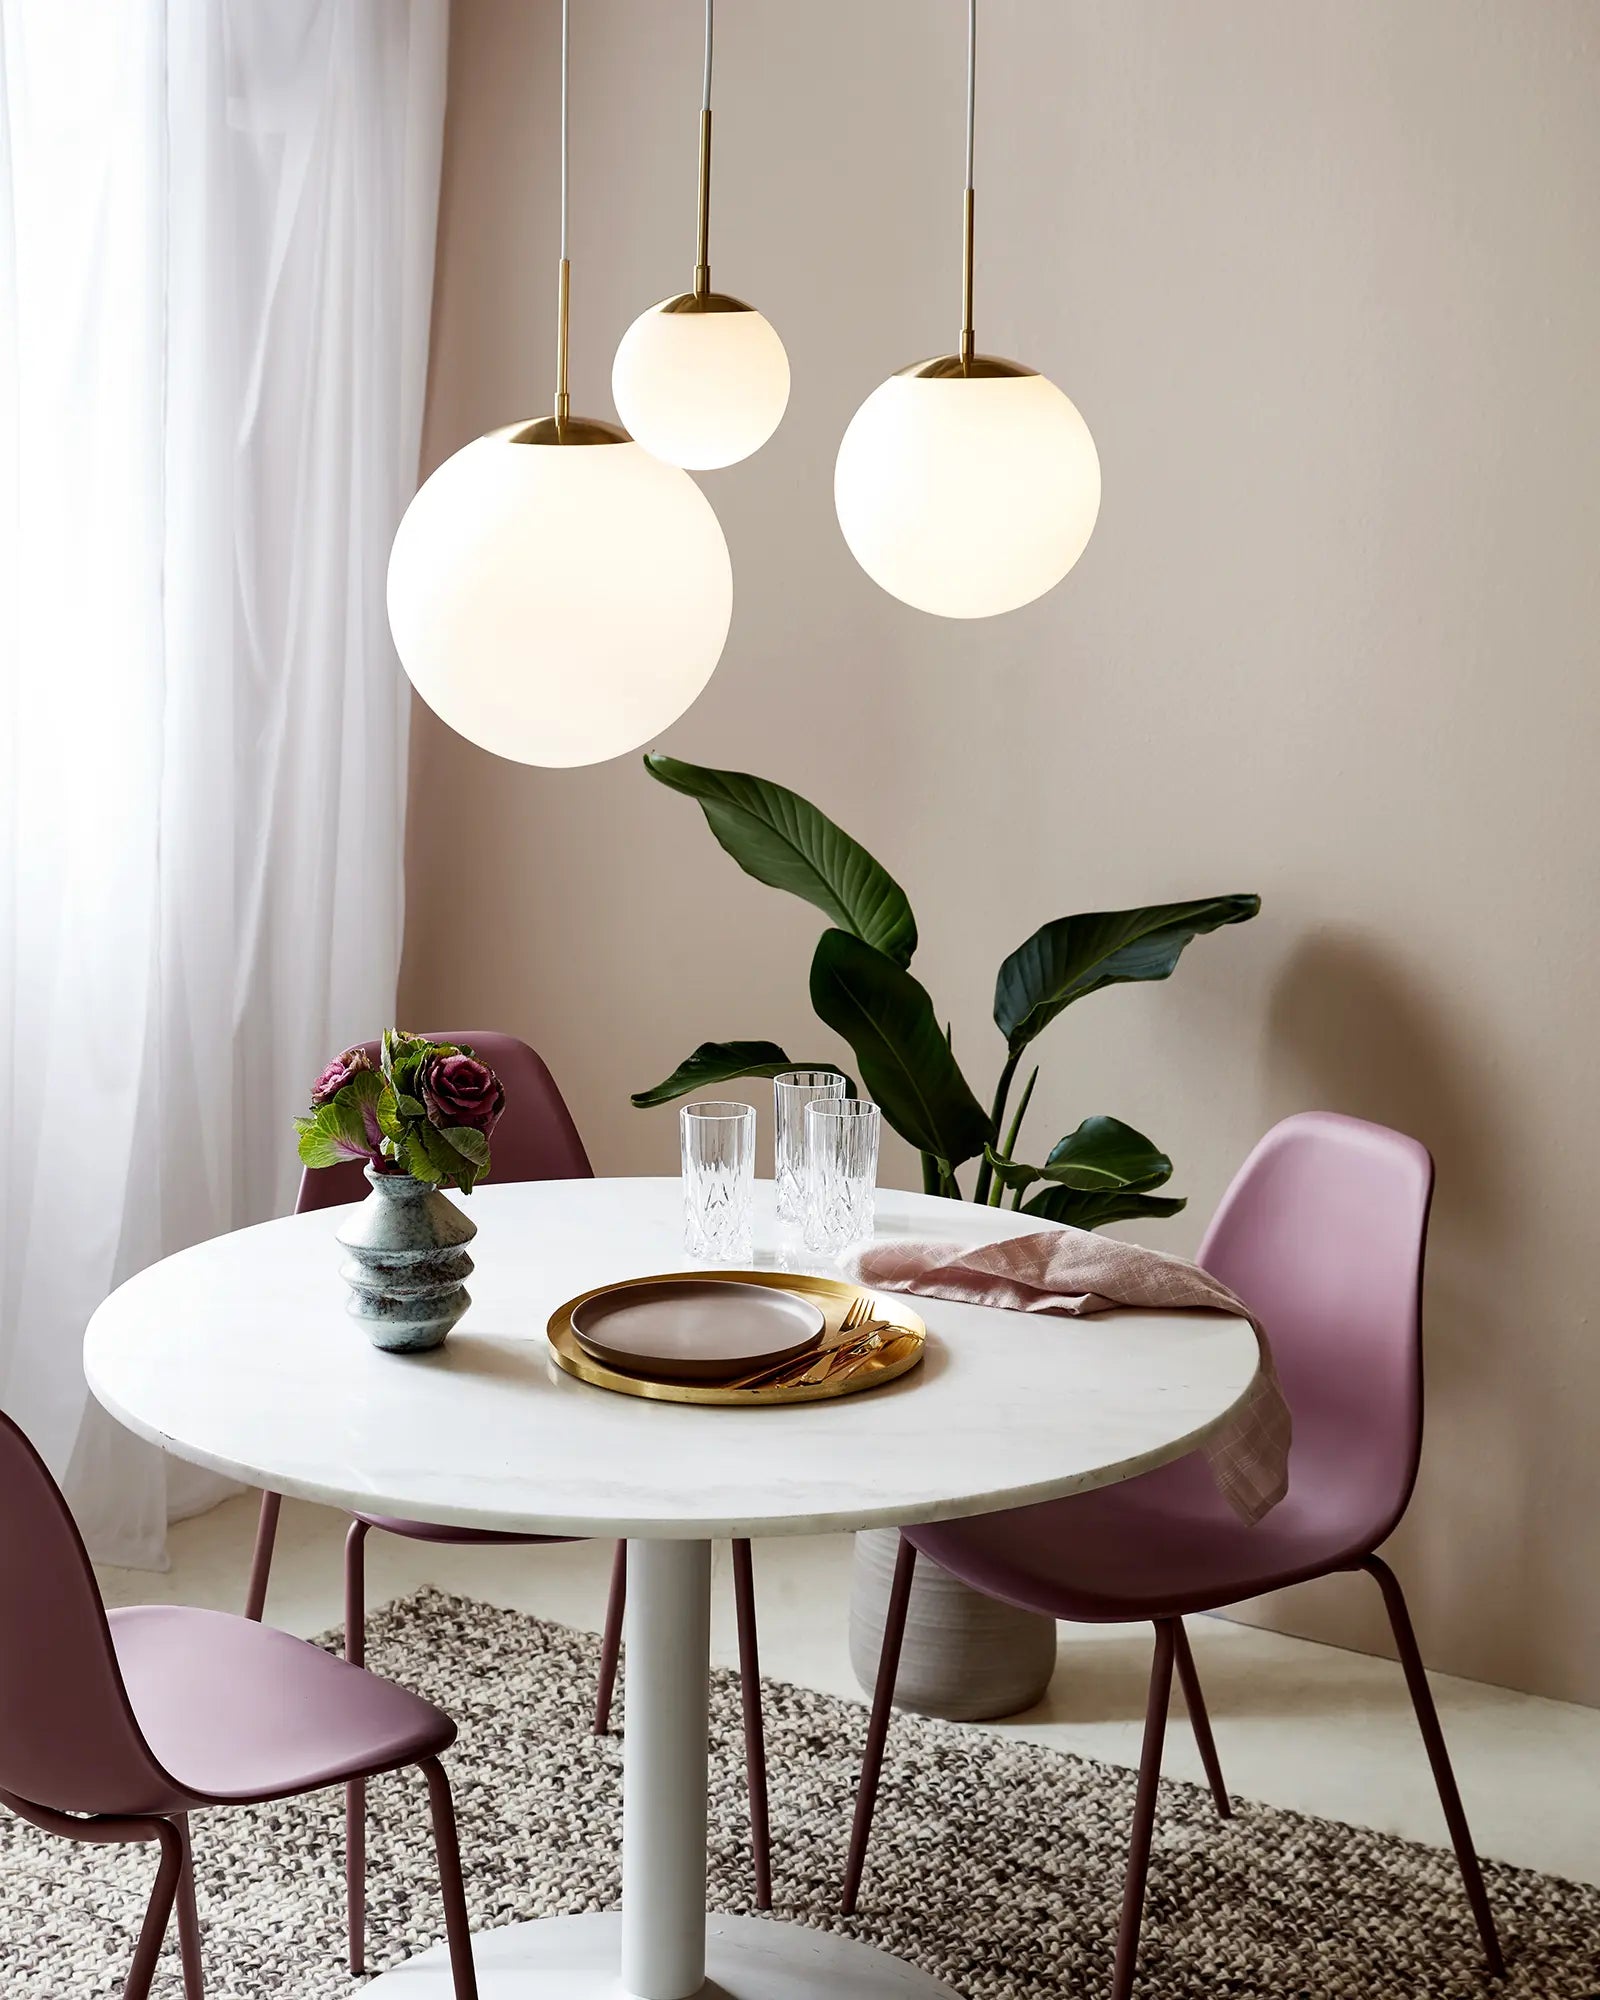 Grant orb pendant light in opal and brass cluster above a dining table